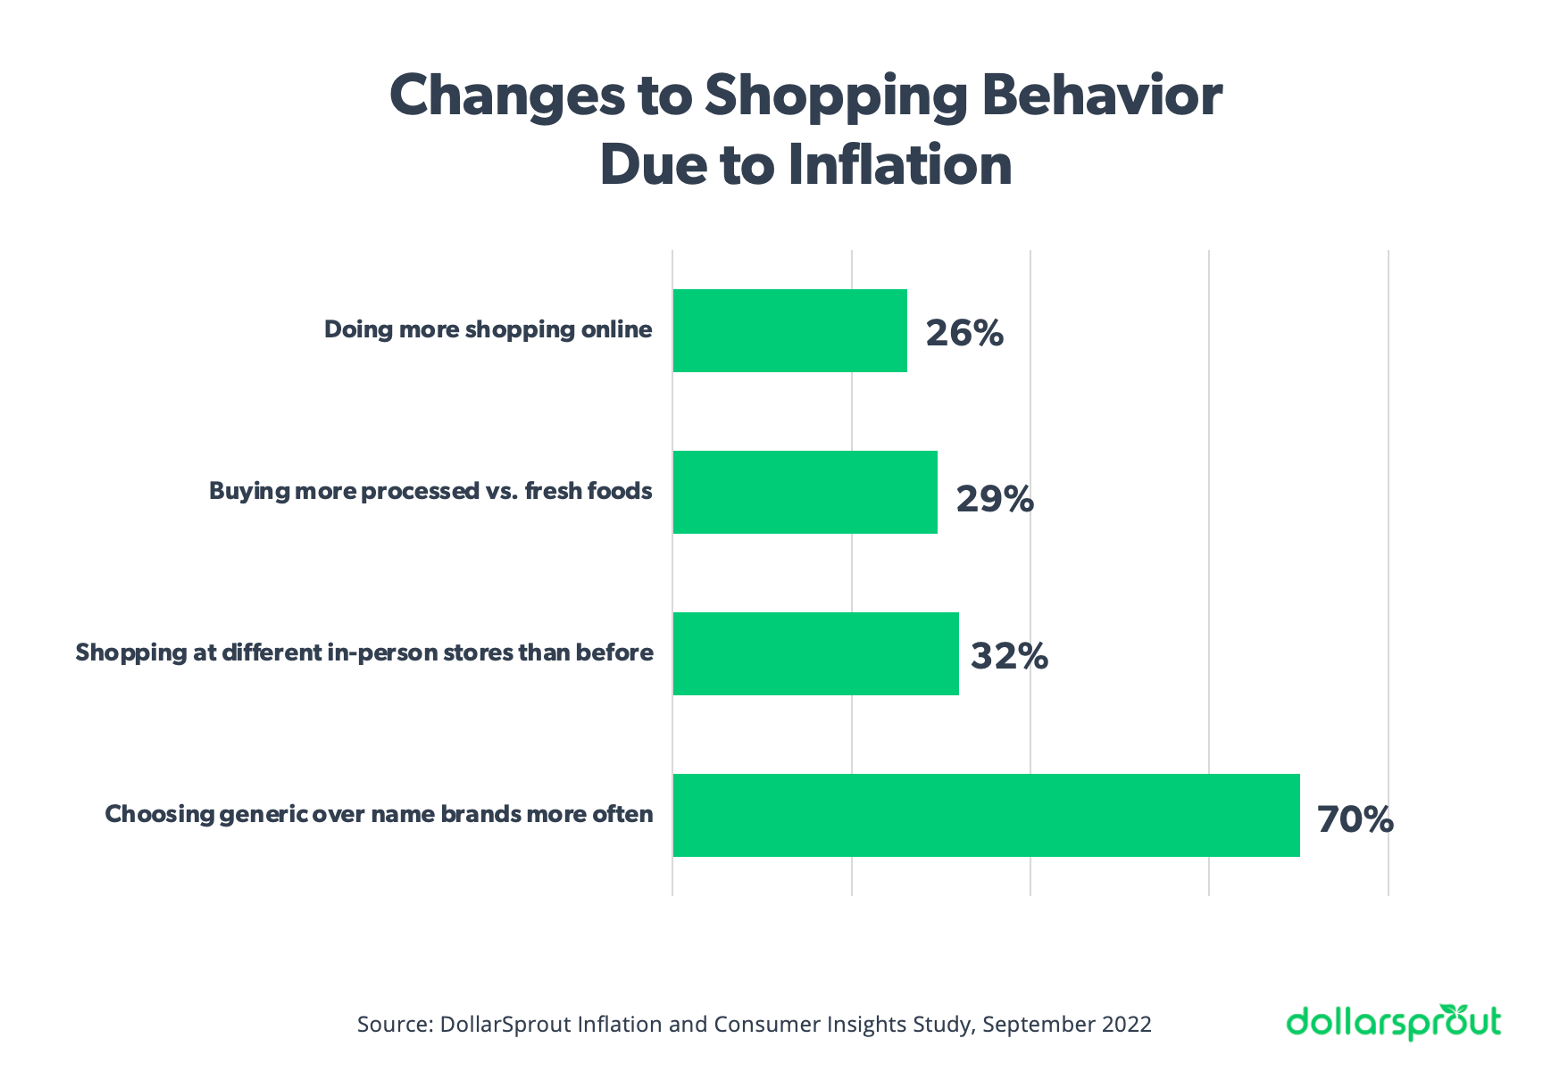 Graph showing changes in purchasing behavior due to inflation, with the most common change being choosing generic brands over own brands (70%).